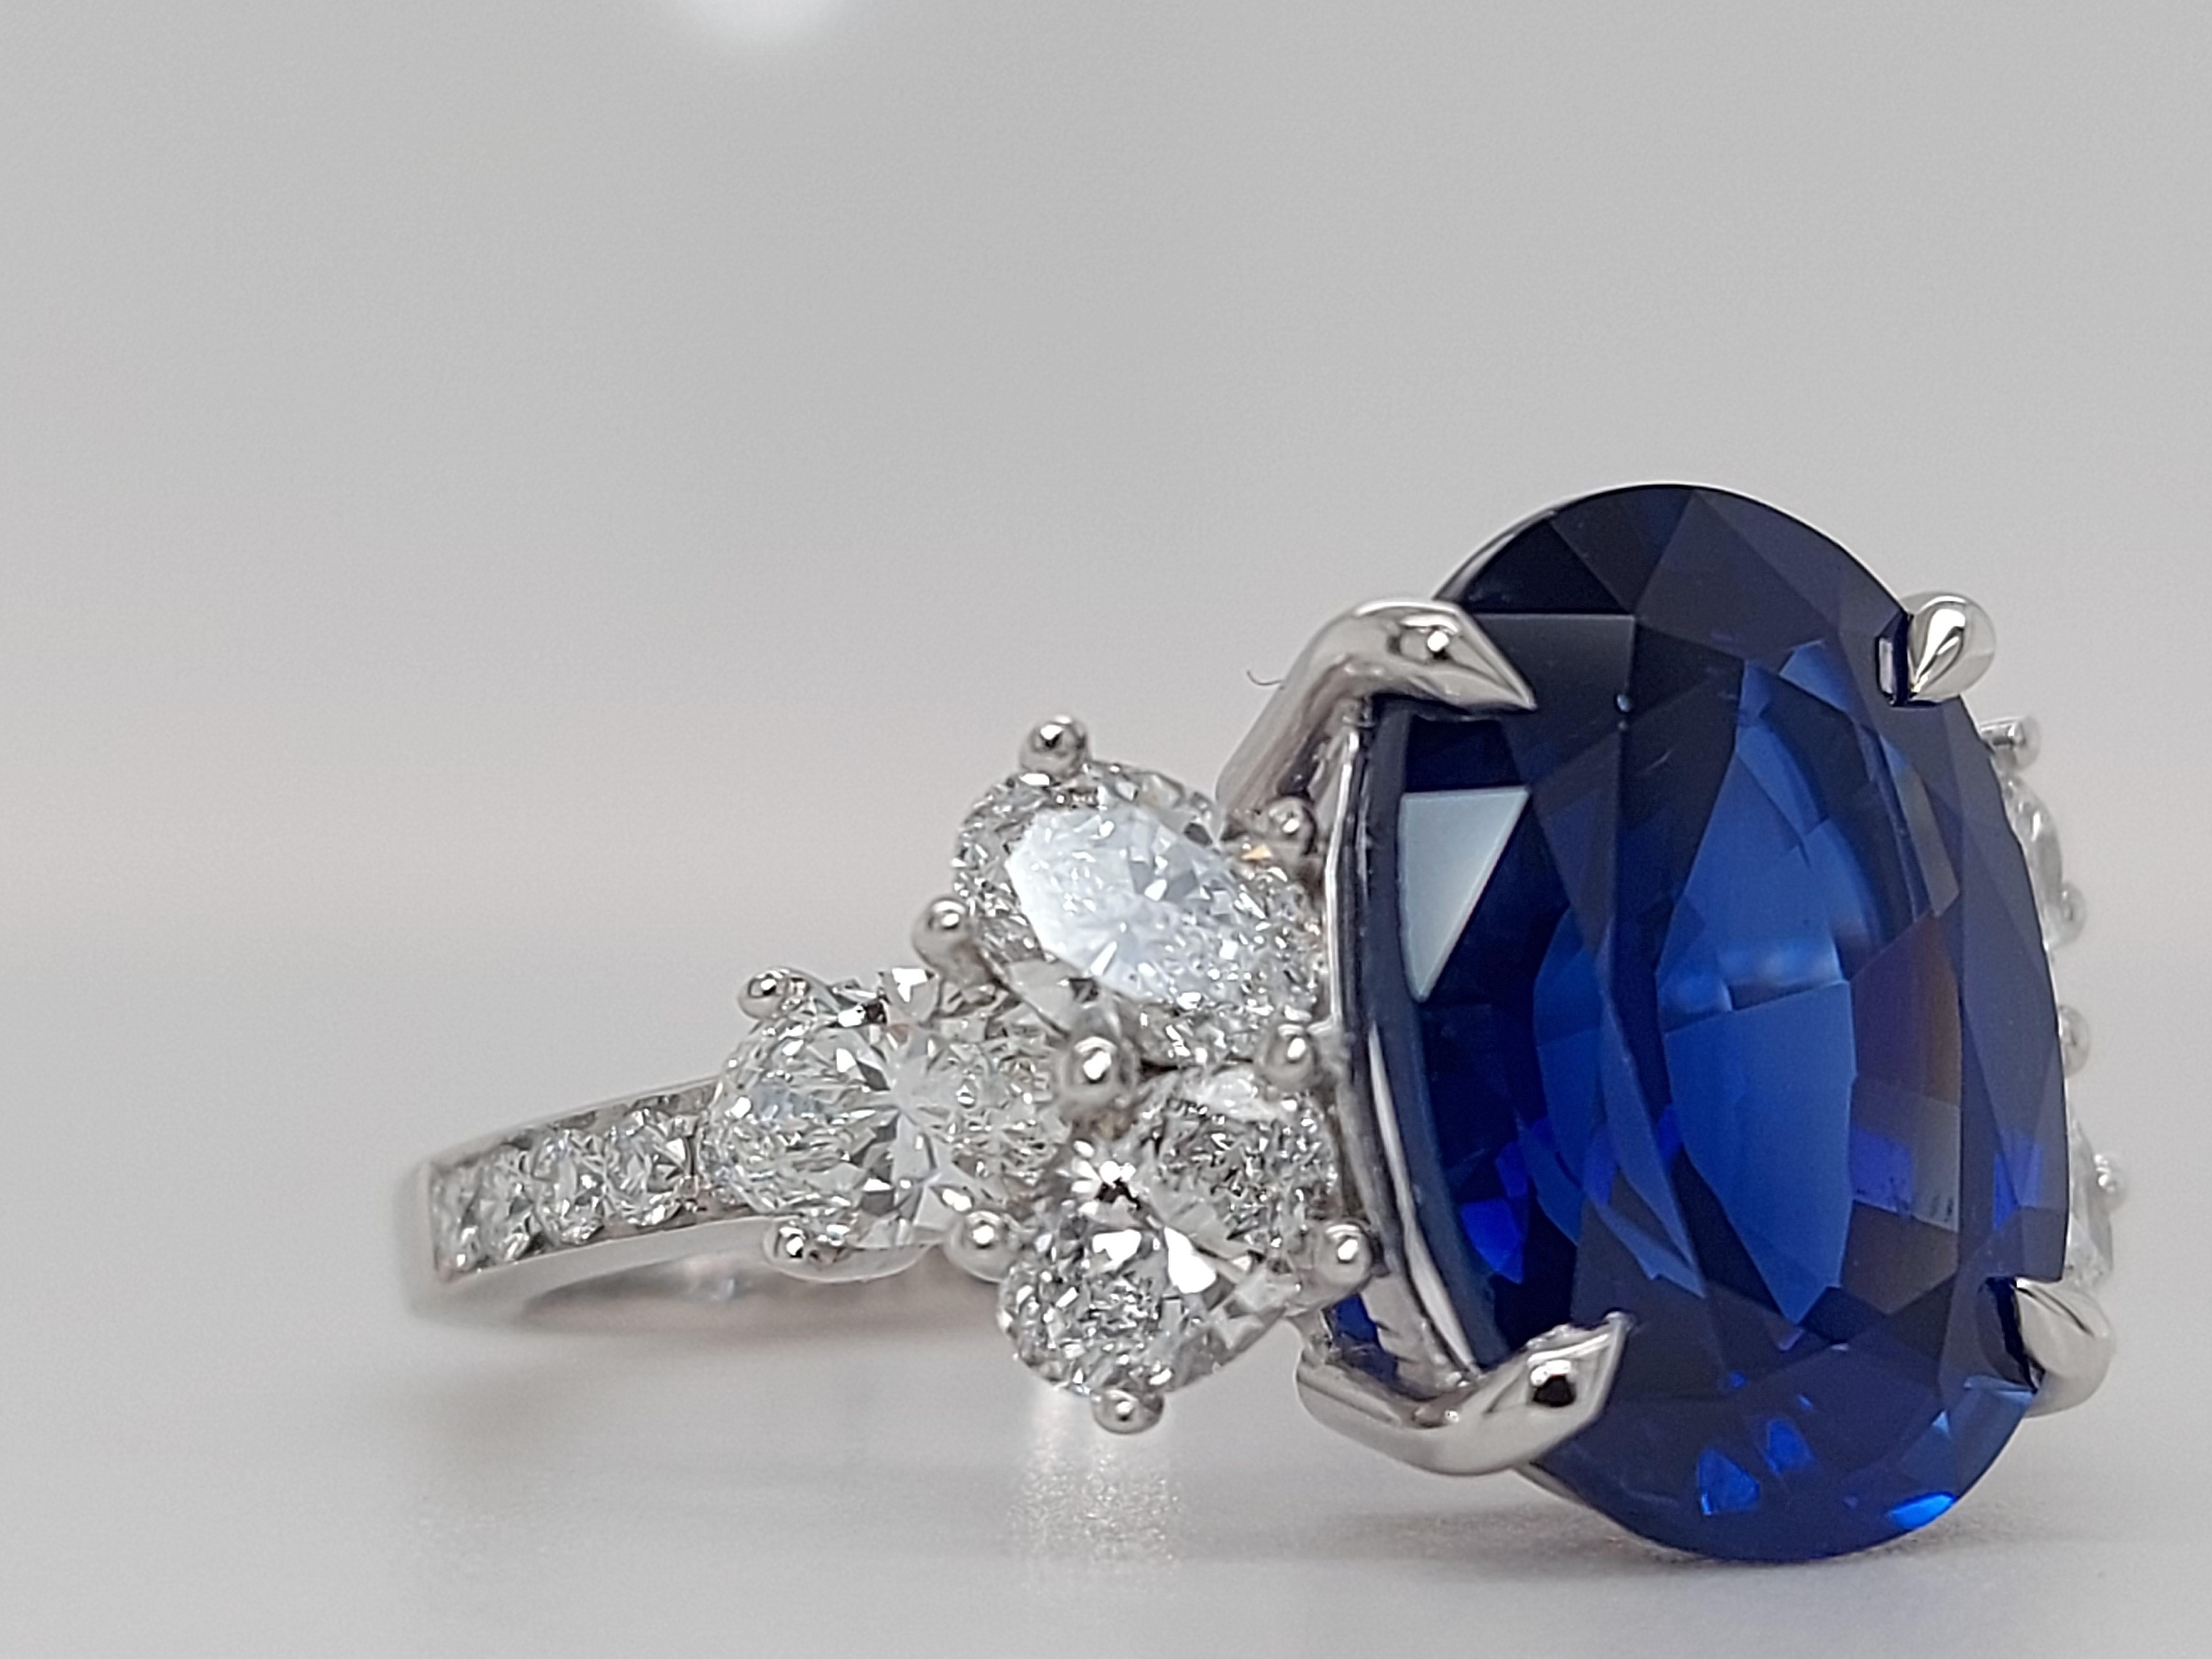 18 Karat White Gold Ring Set with a 7 Carat Sapphire and Diamonds 2